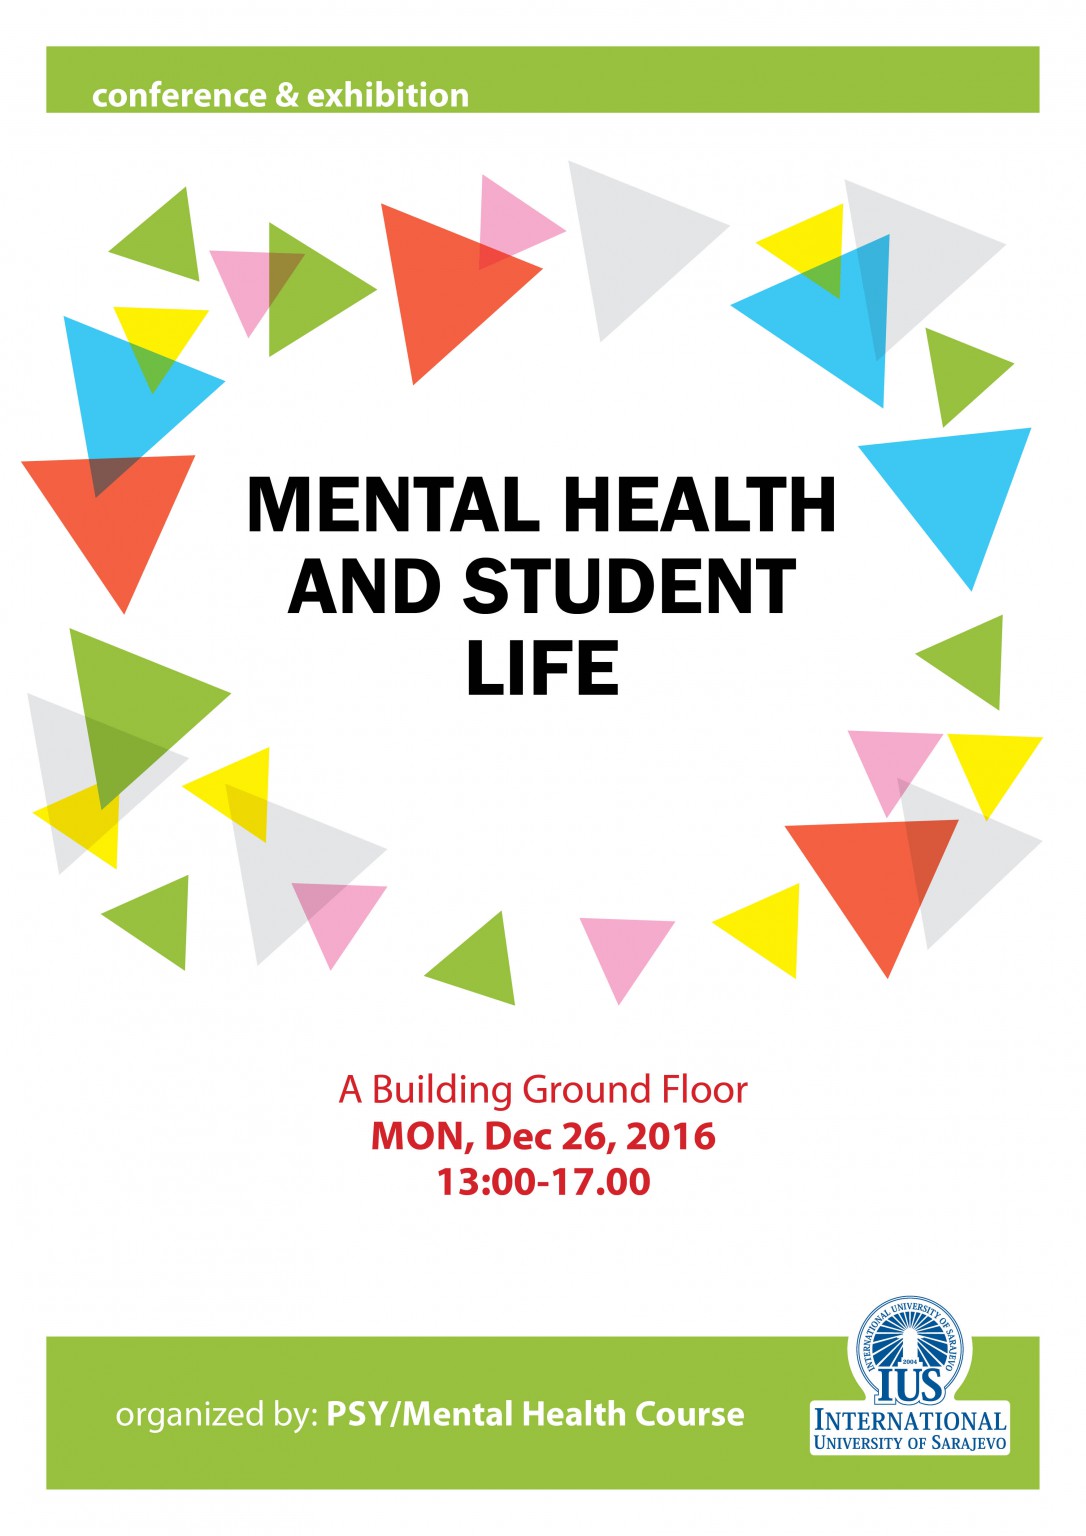  Mental health and student life 